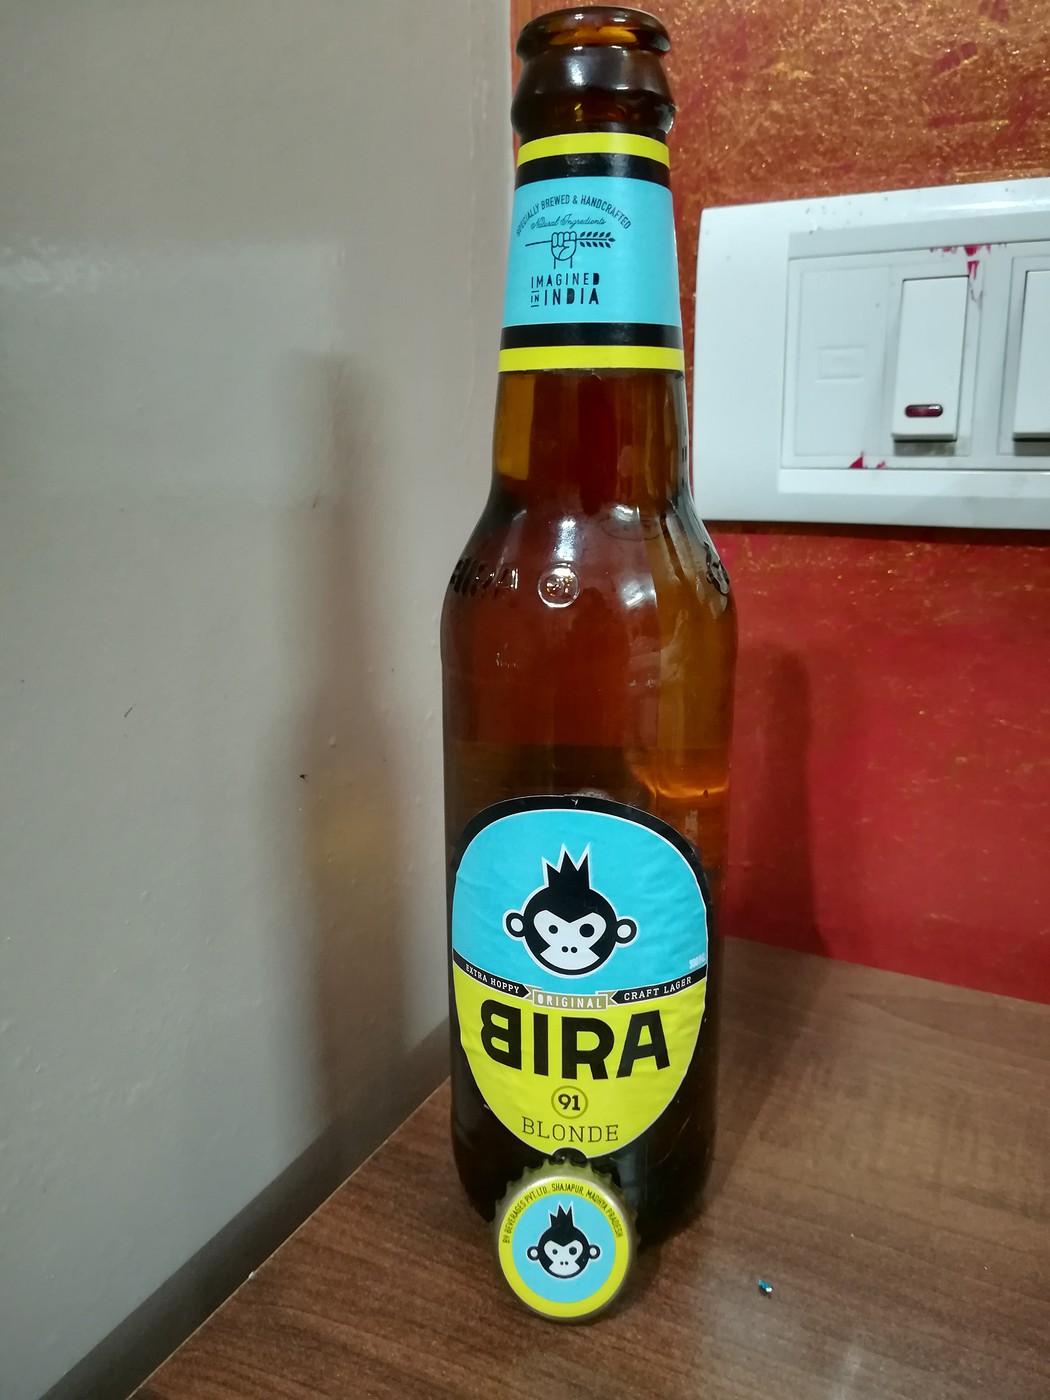 BIRA 91, INDIA'S FIRST CRAFT BEER, MAKES U.S. DEBUT AT NEW YORK'S TRIBECA  FILM FESTIVAL | INTERNET NEWS FOR YOU